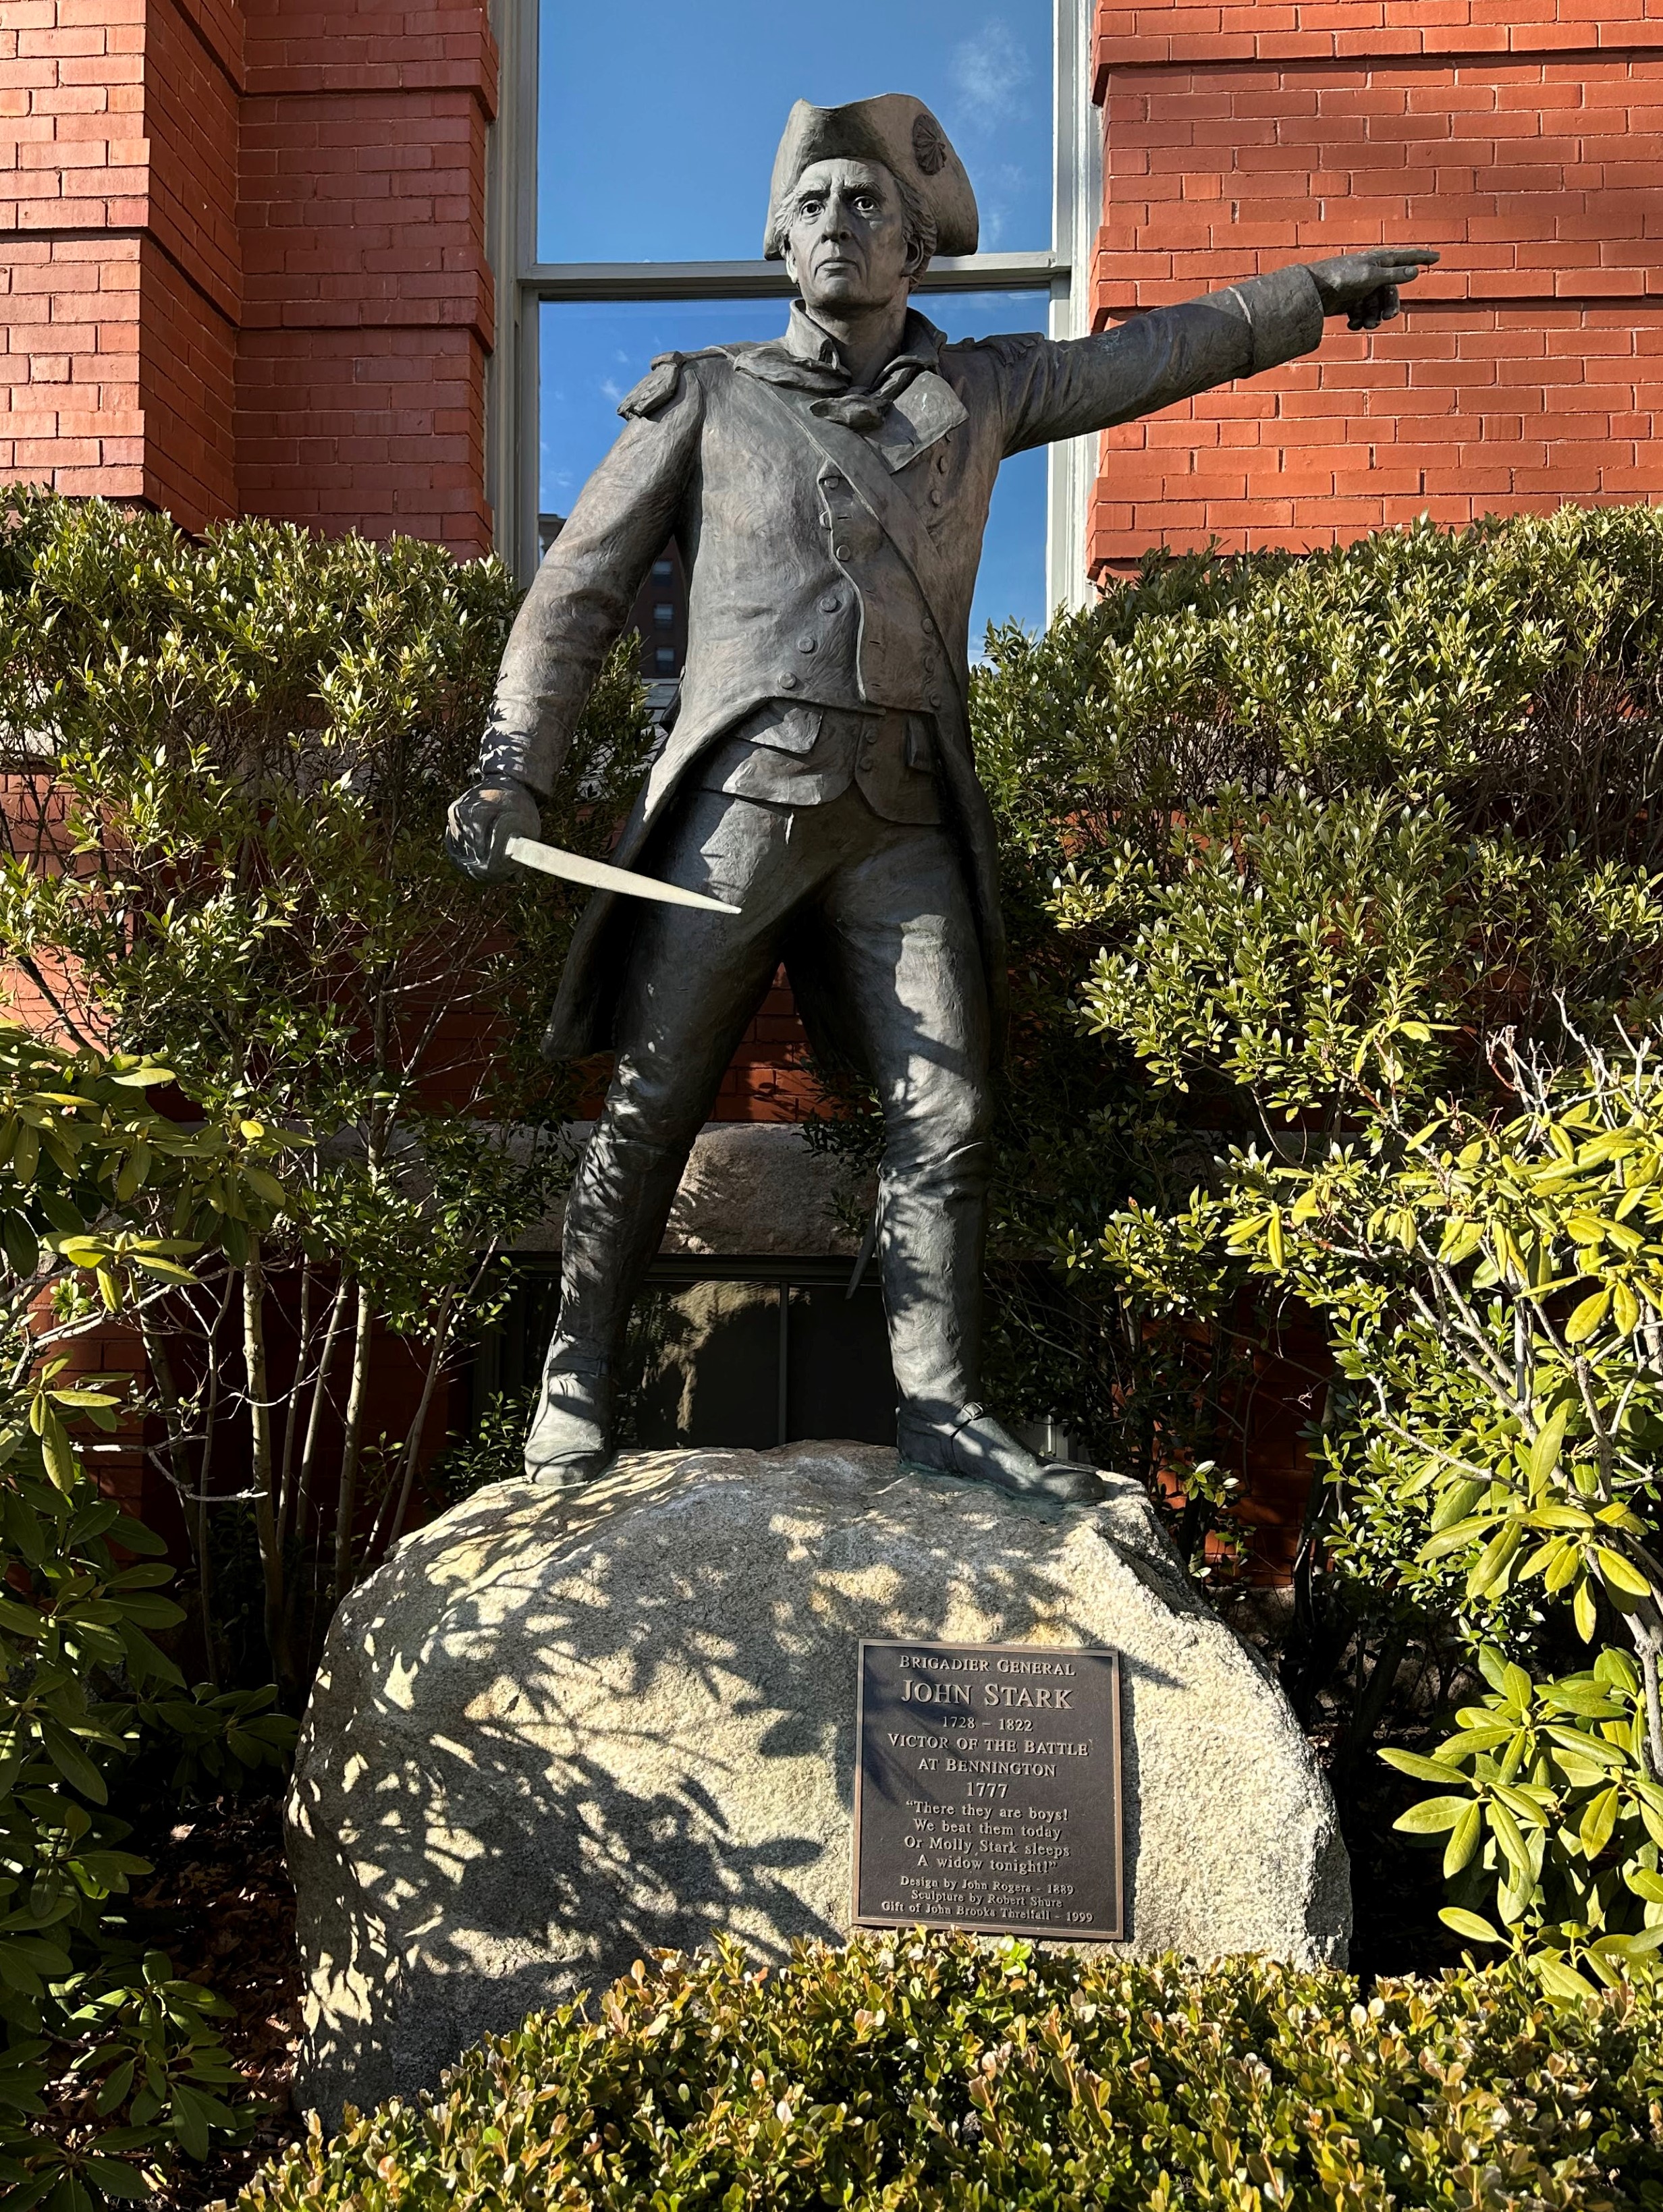 A photo of a statue of John Stark found in New Hampshire, the statue depicts him pointing to his left with his left hand raised above his neckline, and in his right hand he holds a short sword. He is dressed in a petticoat and hat. He is standing on a boulder, and on the boulder is a plaque that reads 'Brigadier General, John Stark, 1728-1822, Victor of the Battle at Bennington, 1777, 'There they are boys! We beat them today/ Or Molly, Stark sleep a widow tonight!' Design by John Rogers 1889, Sculpture by Robert Shure, Gift of John Brooks Threlfall 1999.'